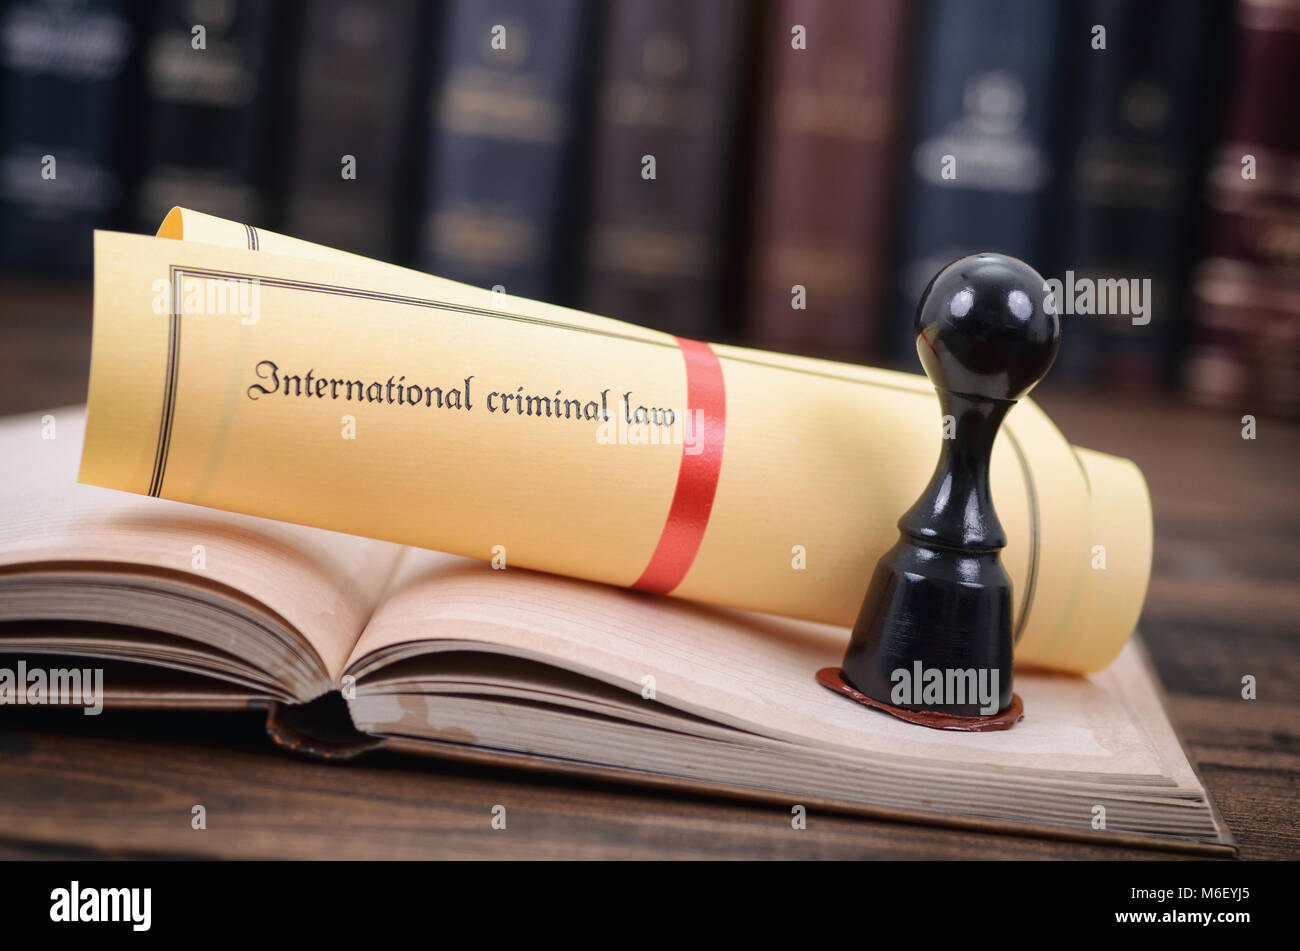 International criminal law, legality concept, notary seal, law and justice concept. Stock Photo